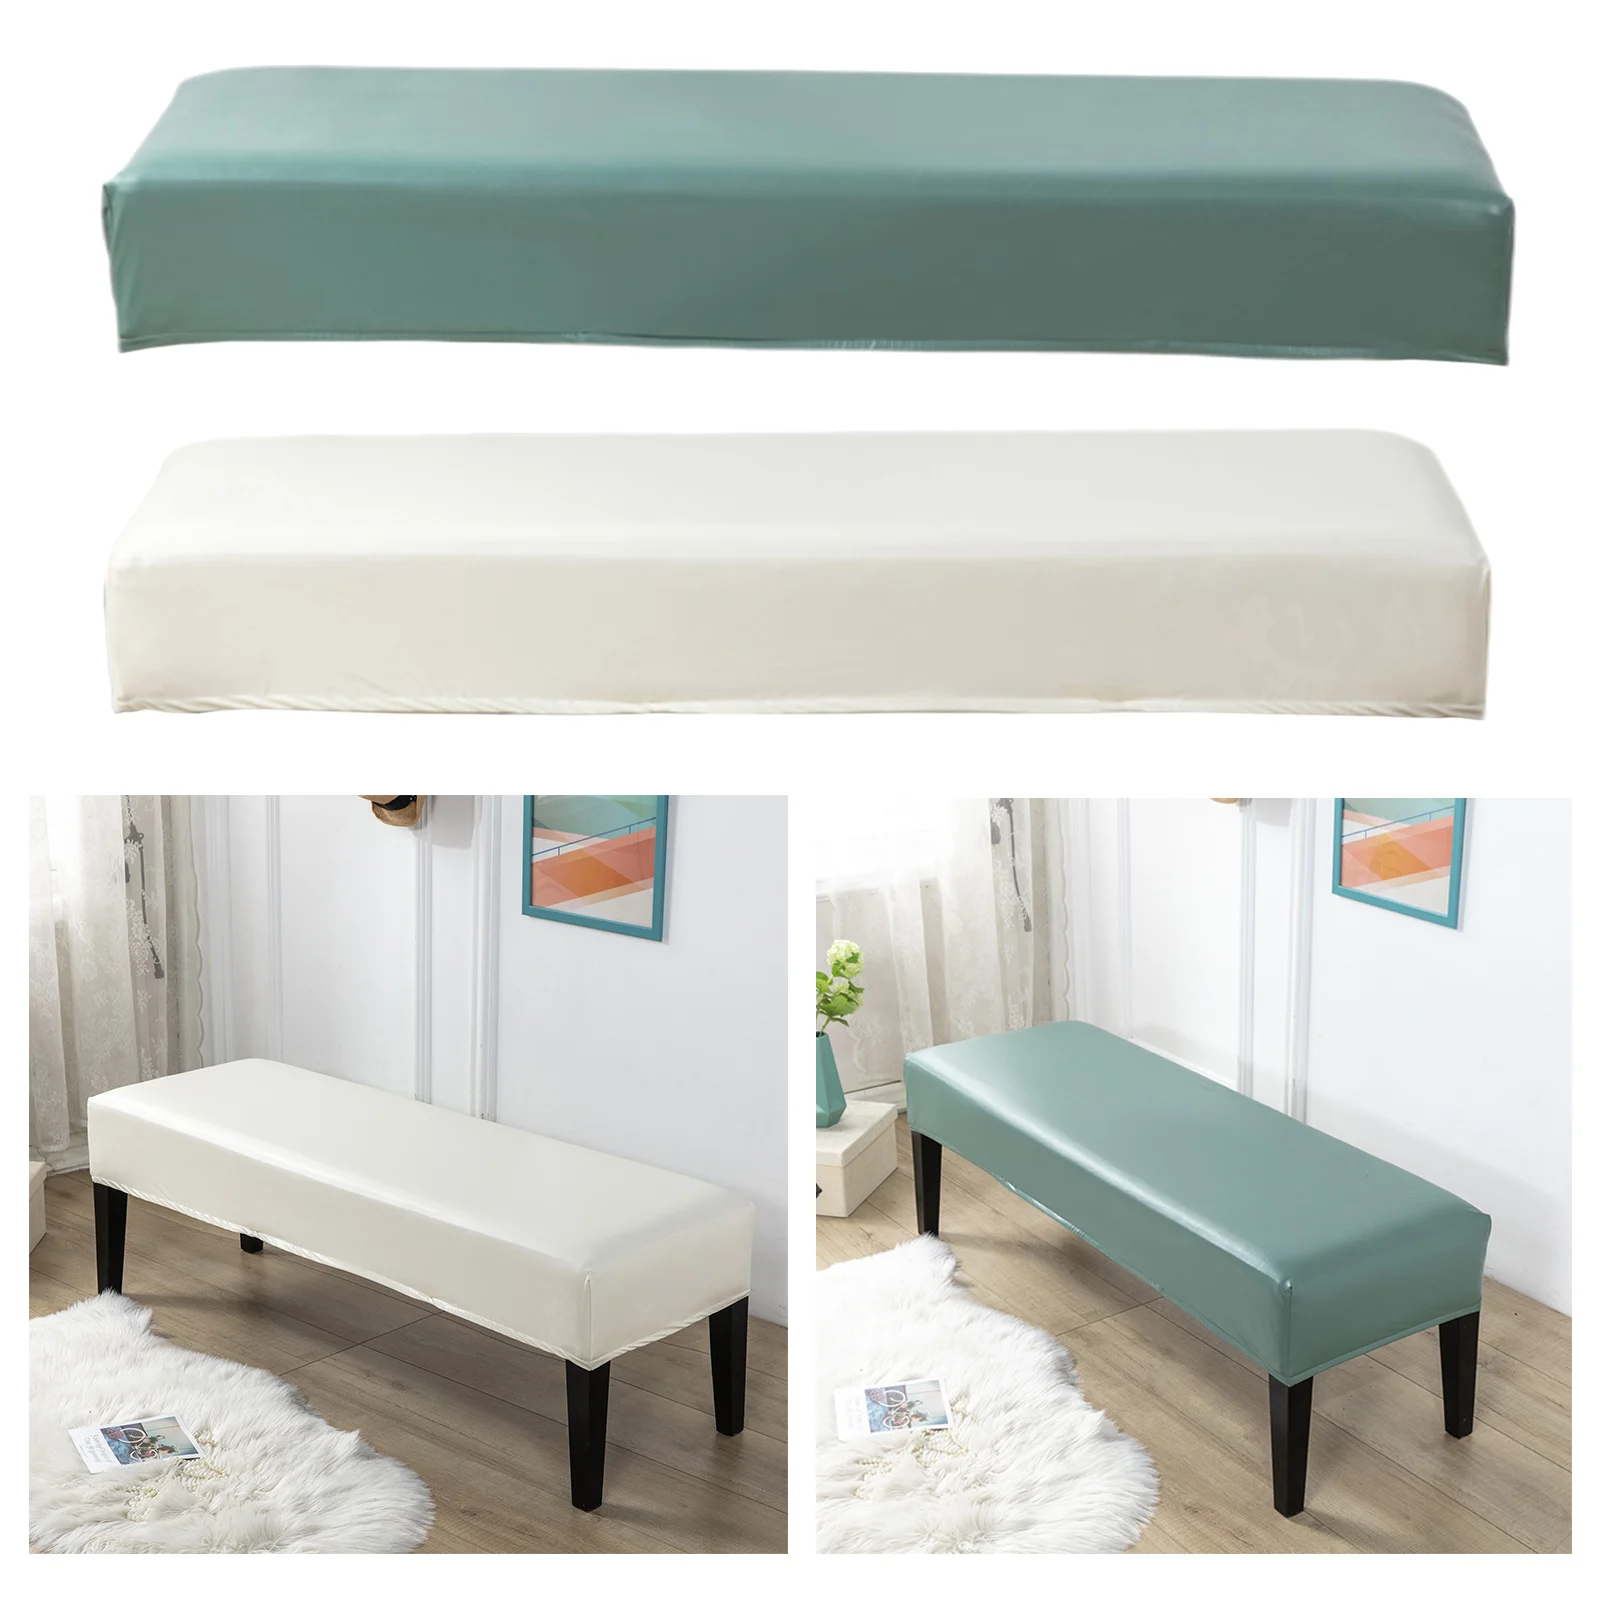 Waterproof Oilproof PU Bench Cover Removable Bench Slipcover